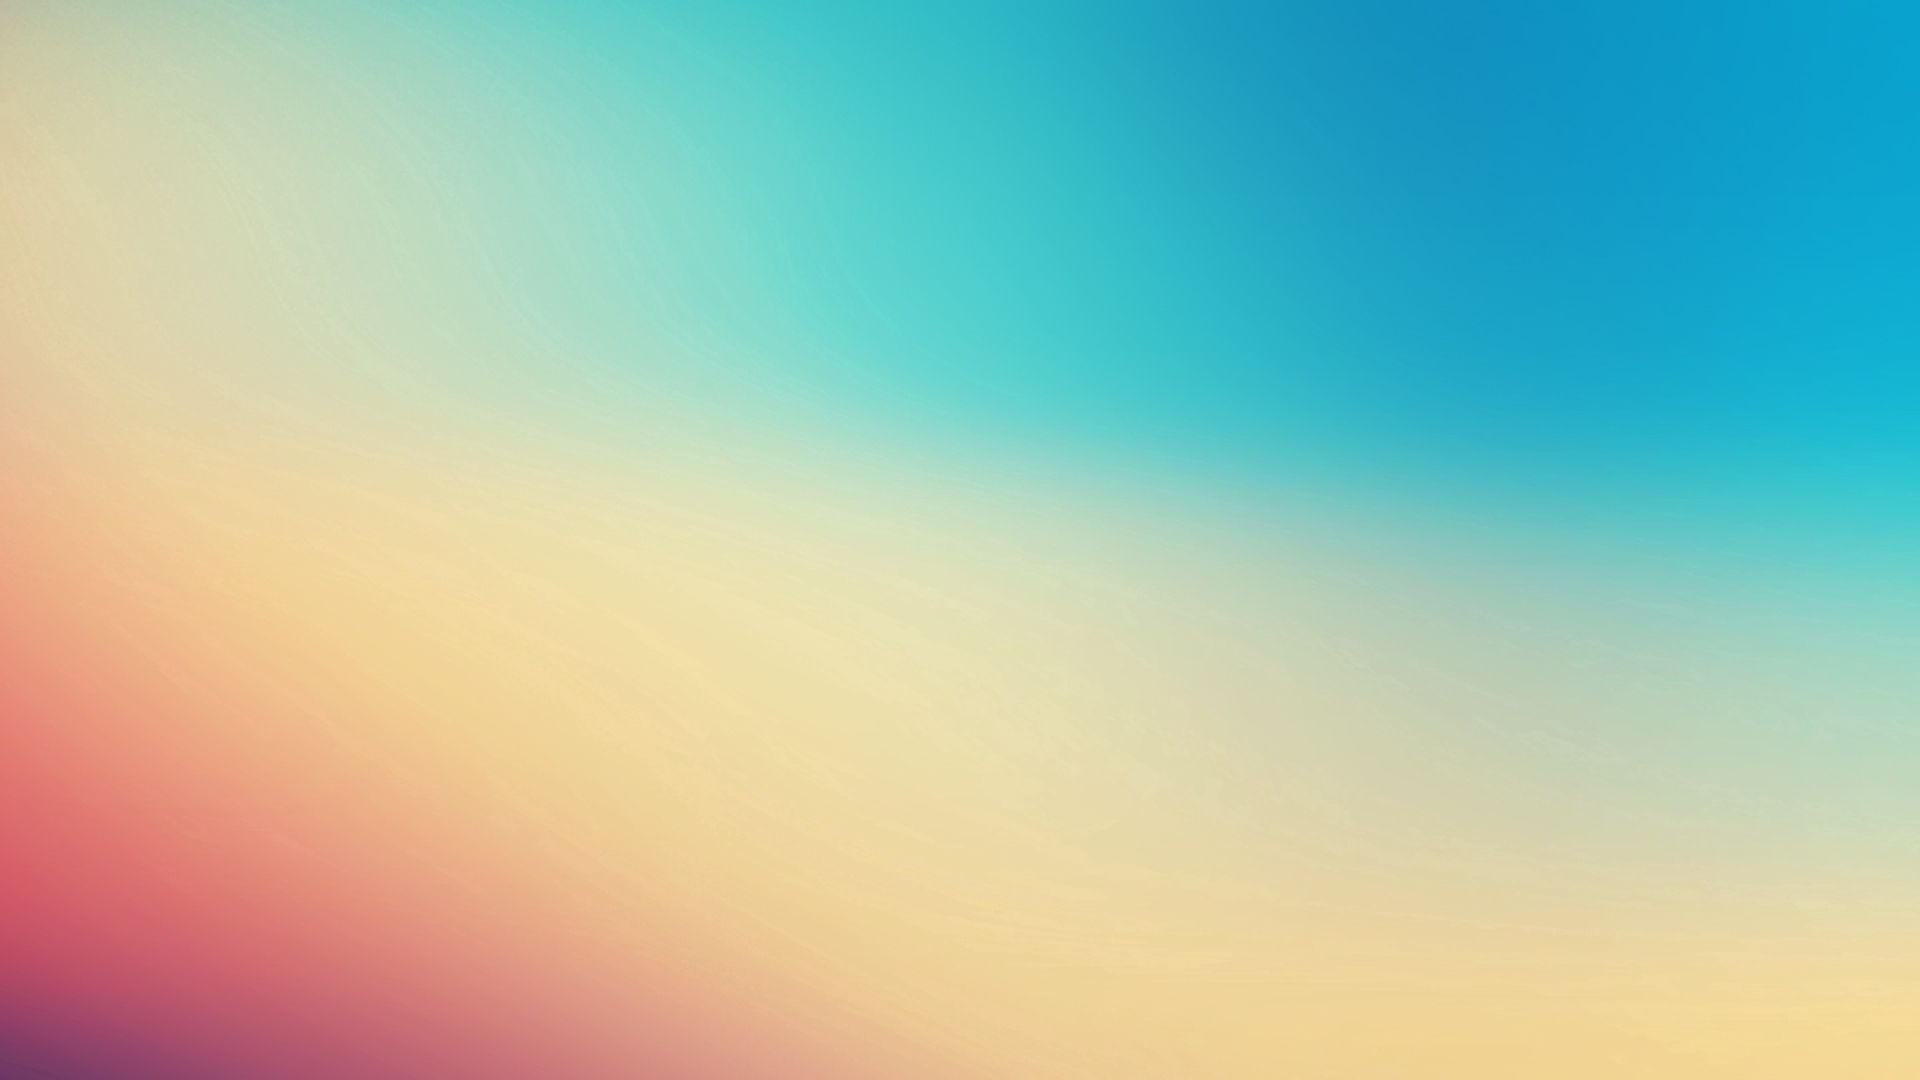  HD Wallpaper for Phone